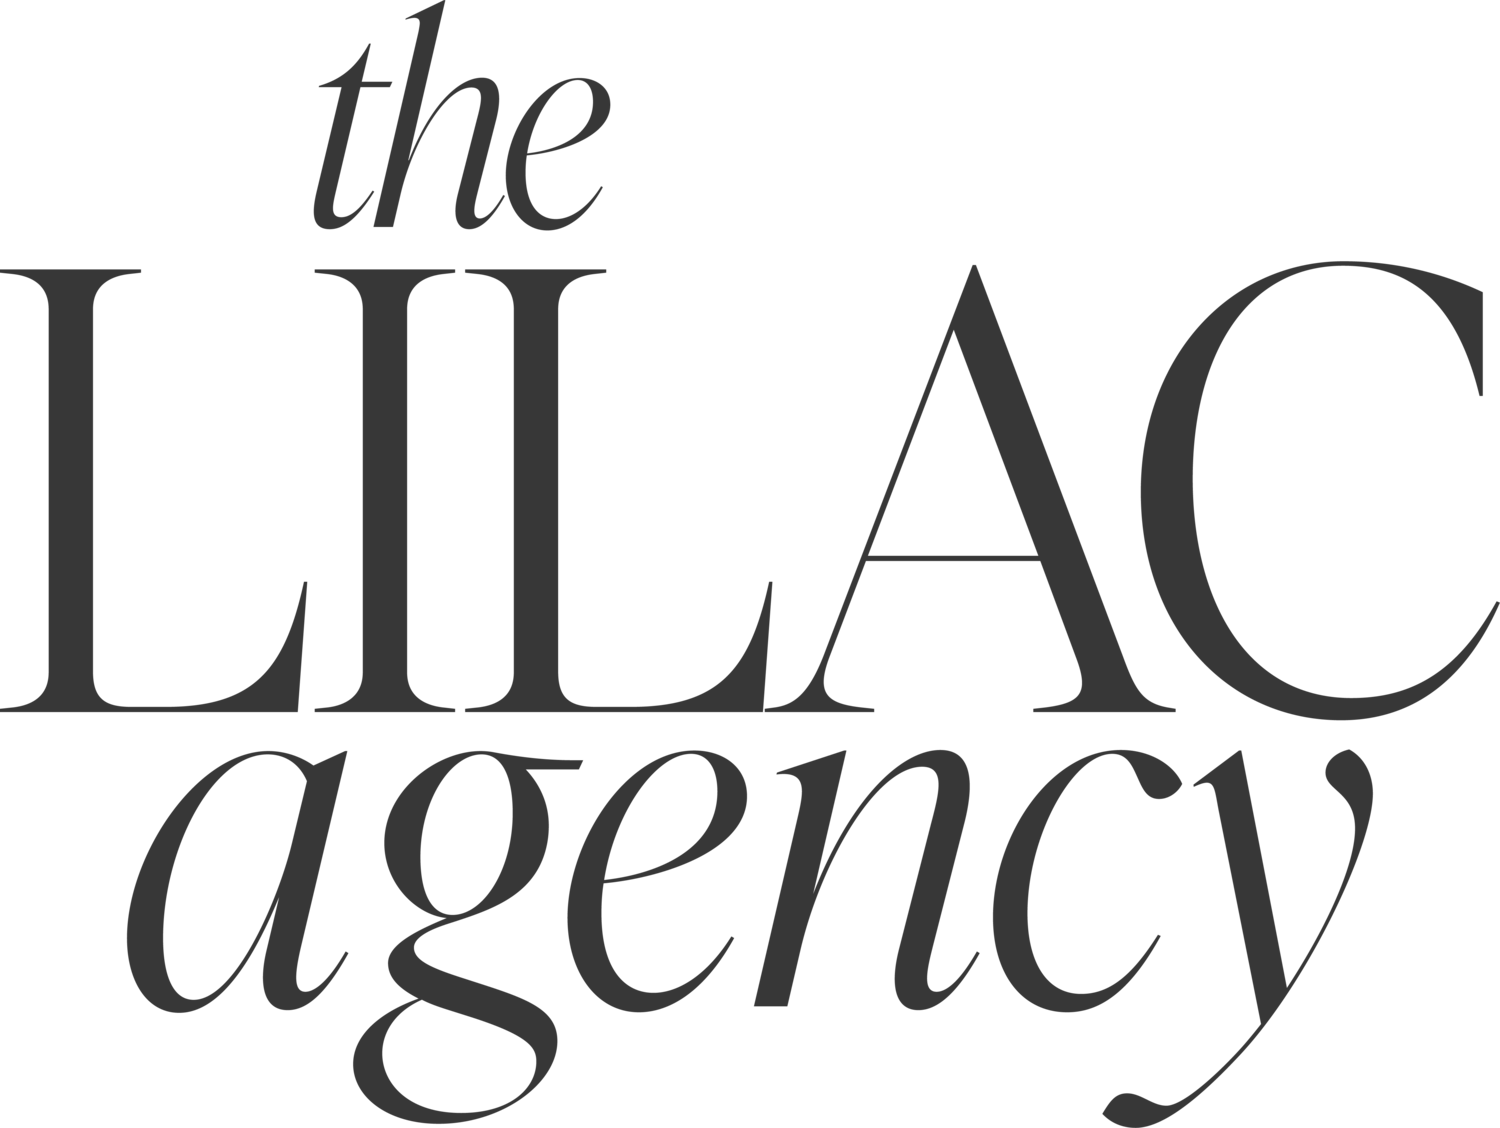 The Lilac Agency